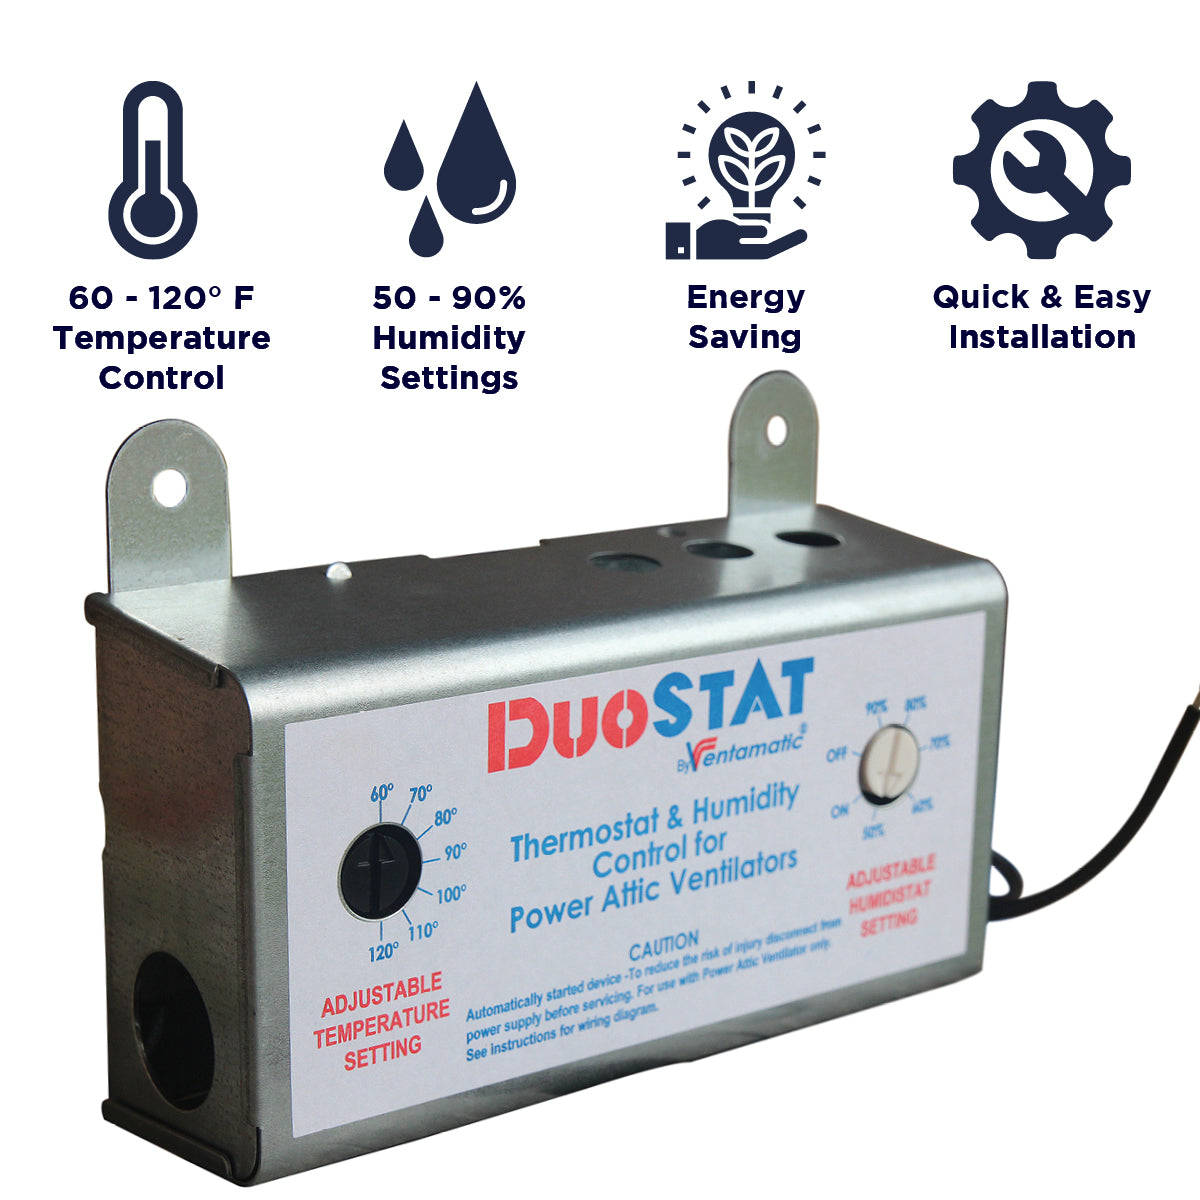 The XXDUOSTAT has 60 -120 degree Fahrenheit and 50 - 90% humidity settings, is an energy saving measure, and installs quickly to your existing power attic fan.